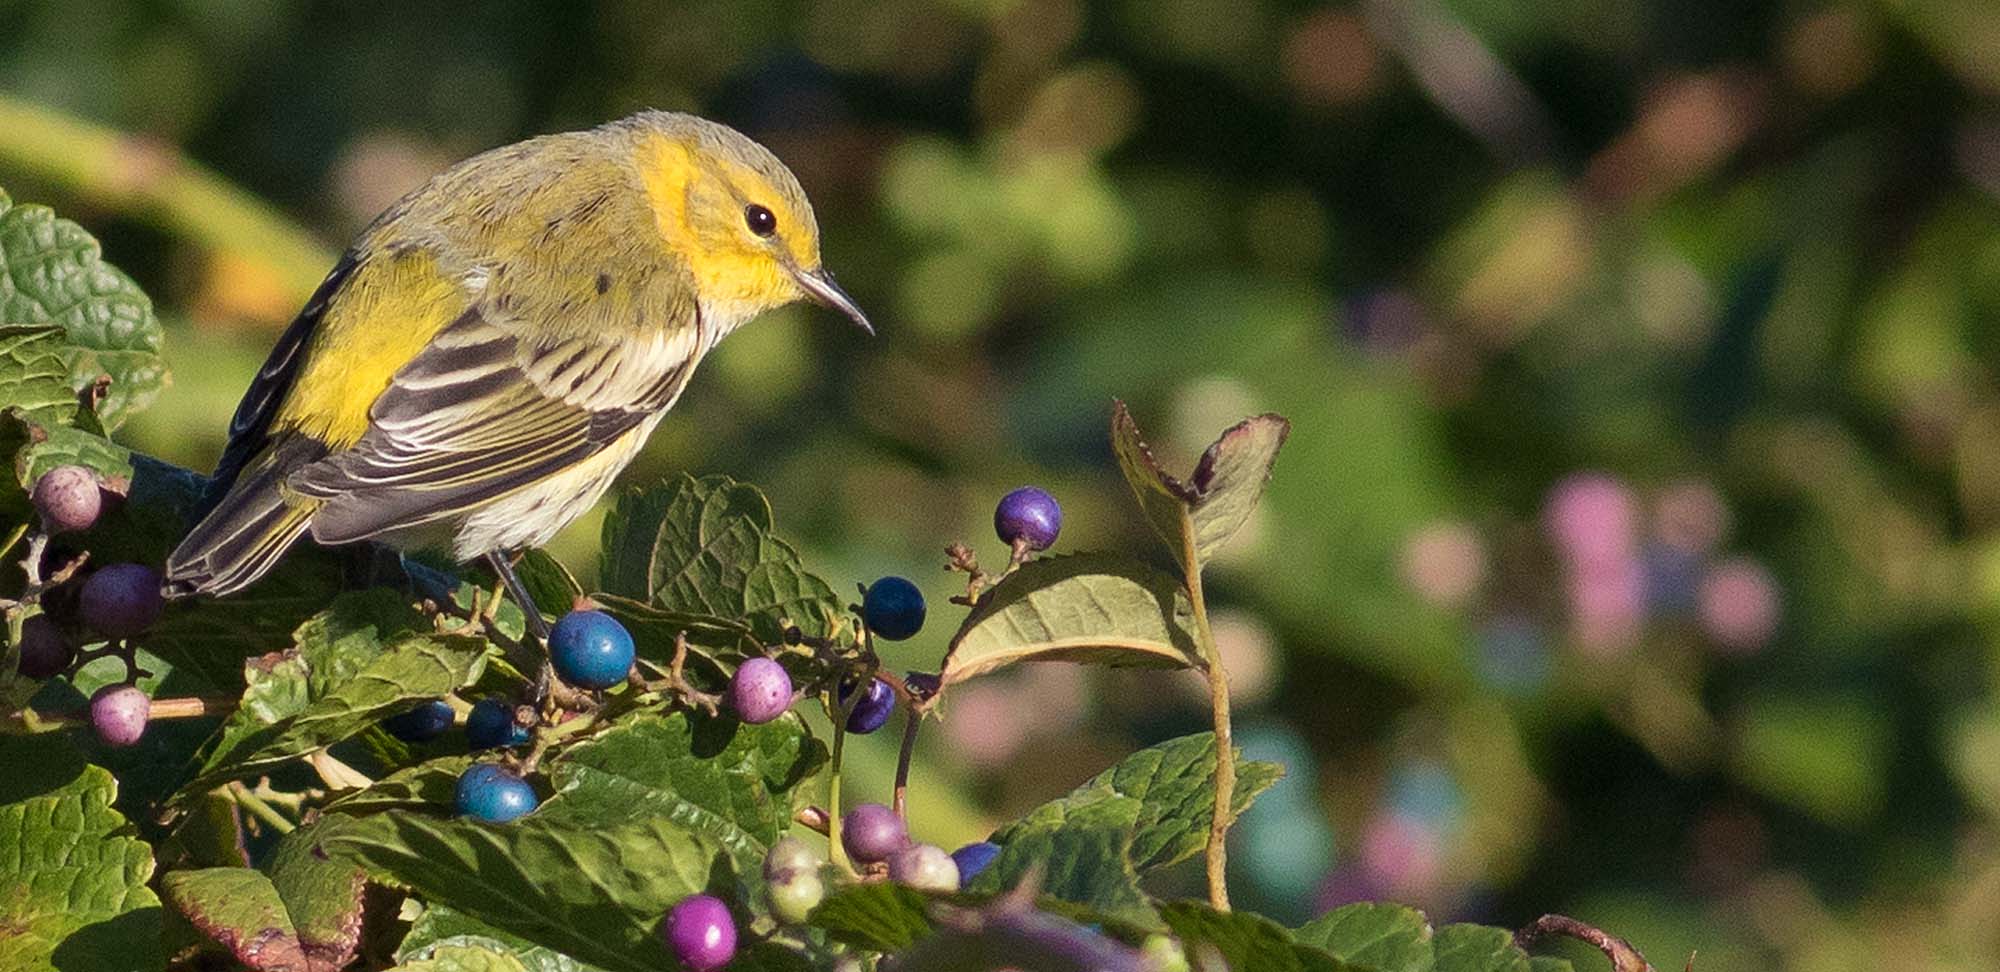 Cape May Warbler Field Guides Birding Tours NEW JERSEY USA